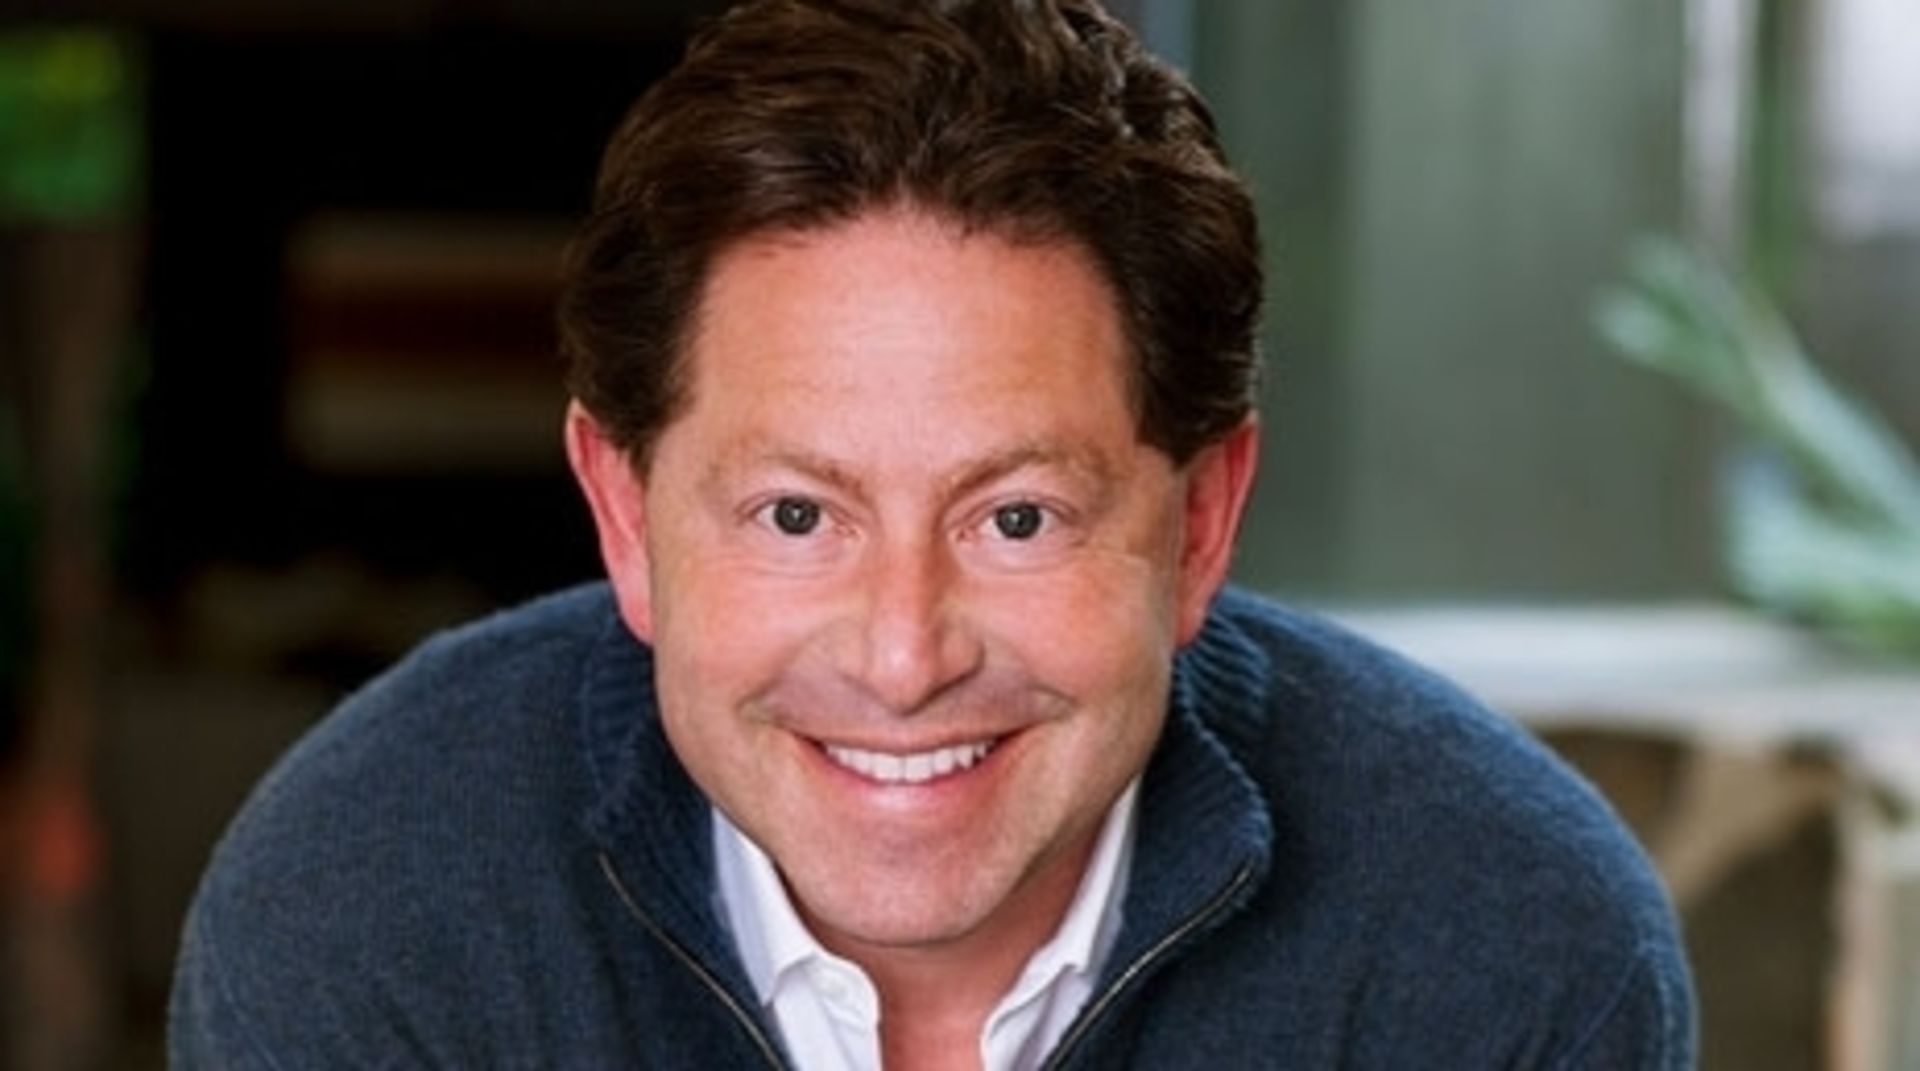 Bobby Kotick will remain as Activision Blizzard CEO after Microsoft  acquisition